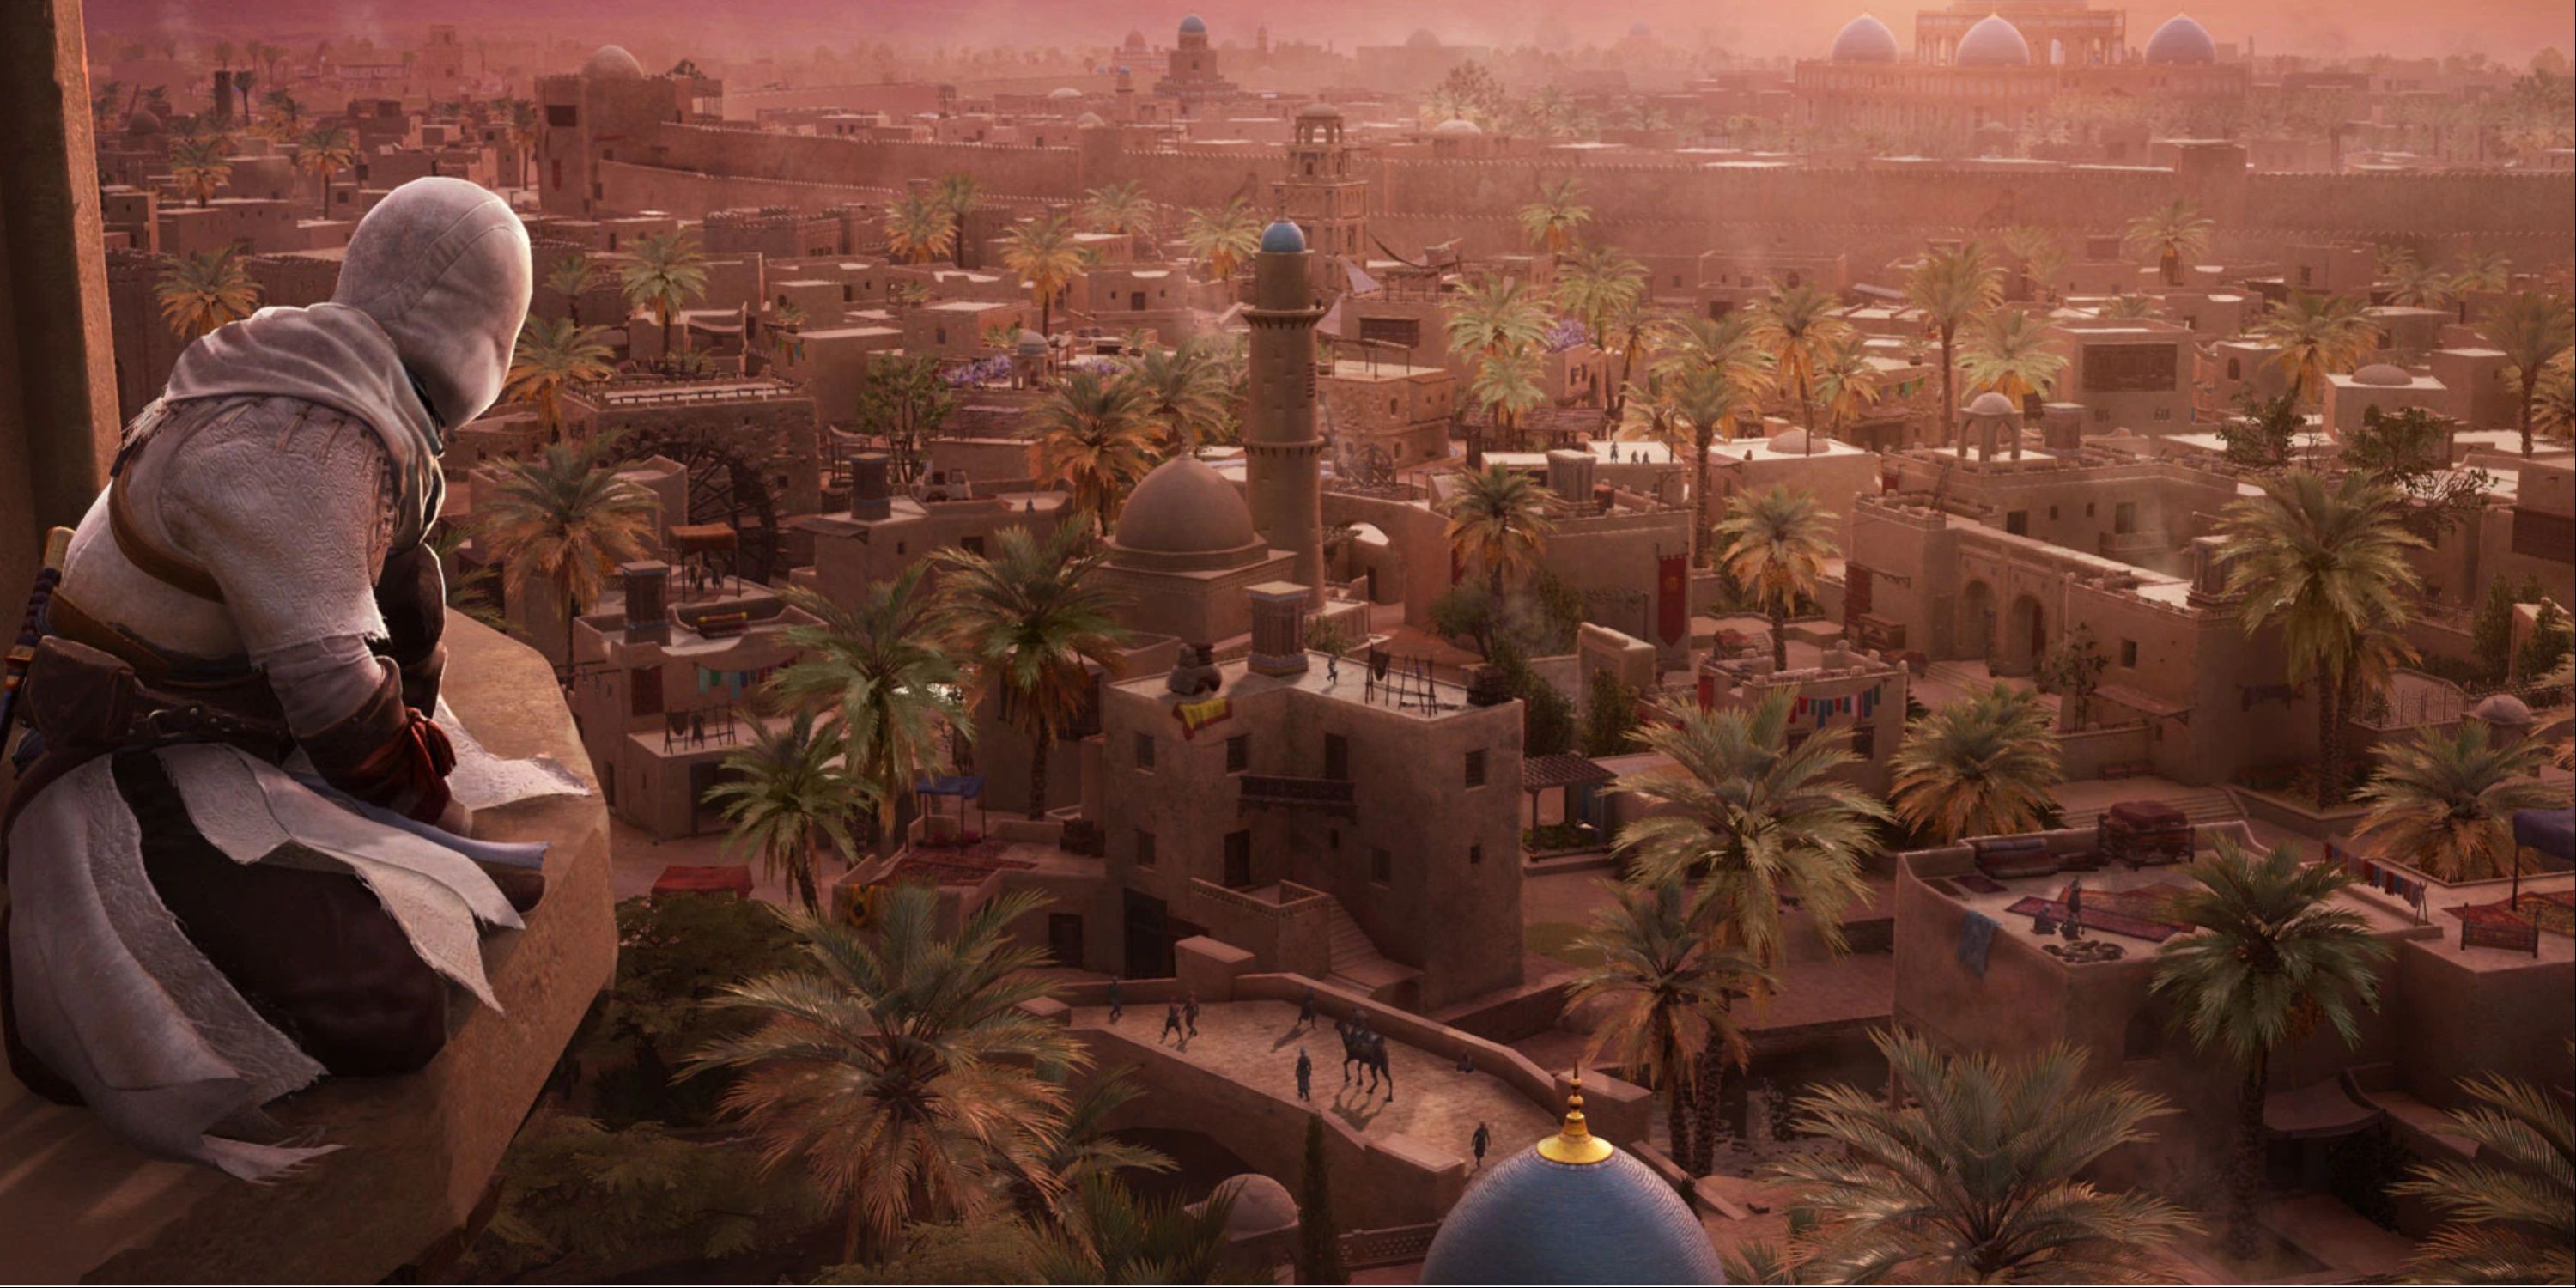 Mirage returns to AC2's parkour but enriches it with modern gaming trends.